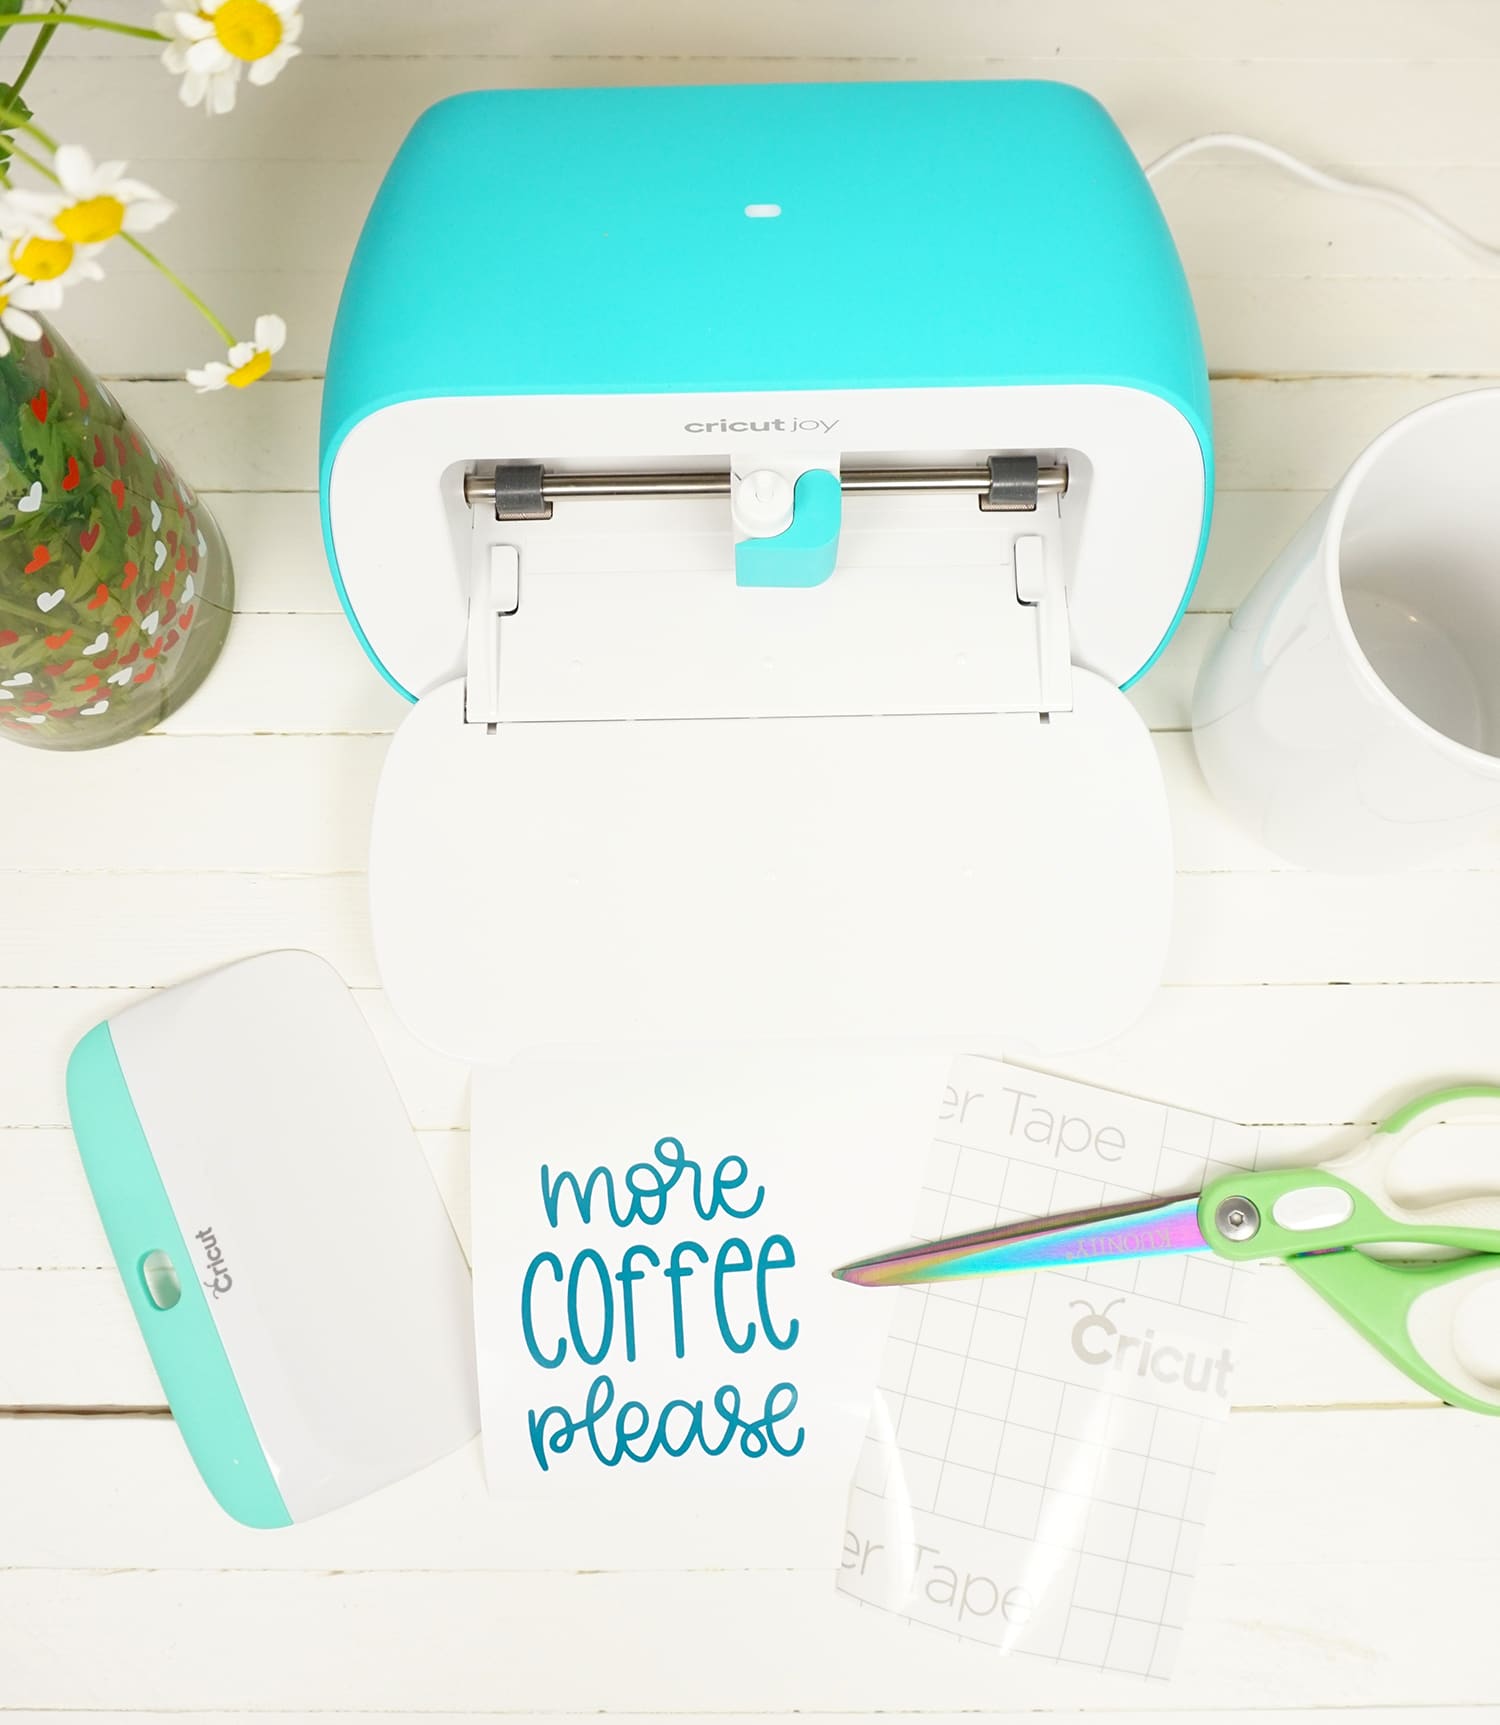 Cricut Joy: What’s New and What Can It Do?